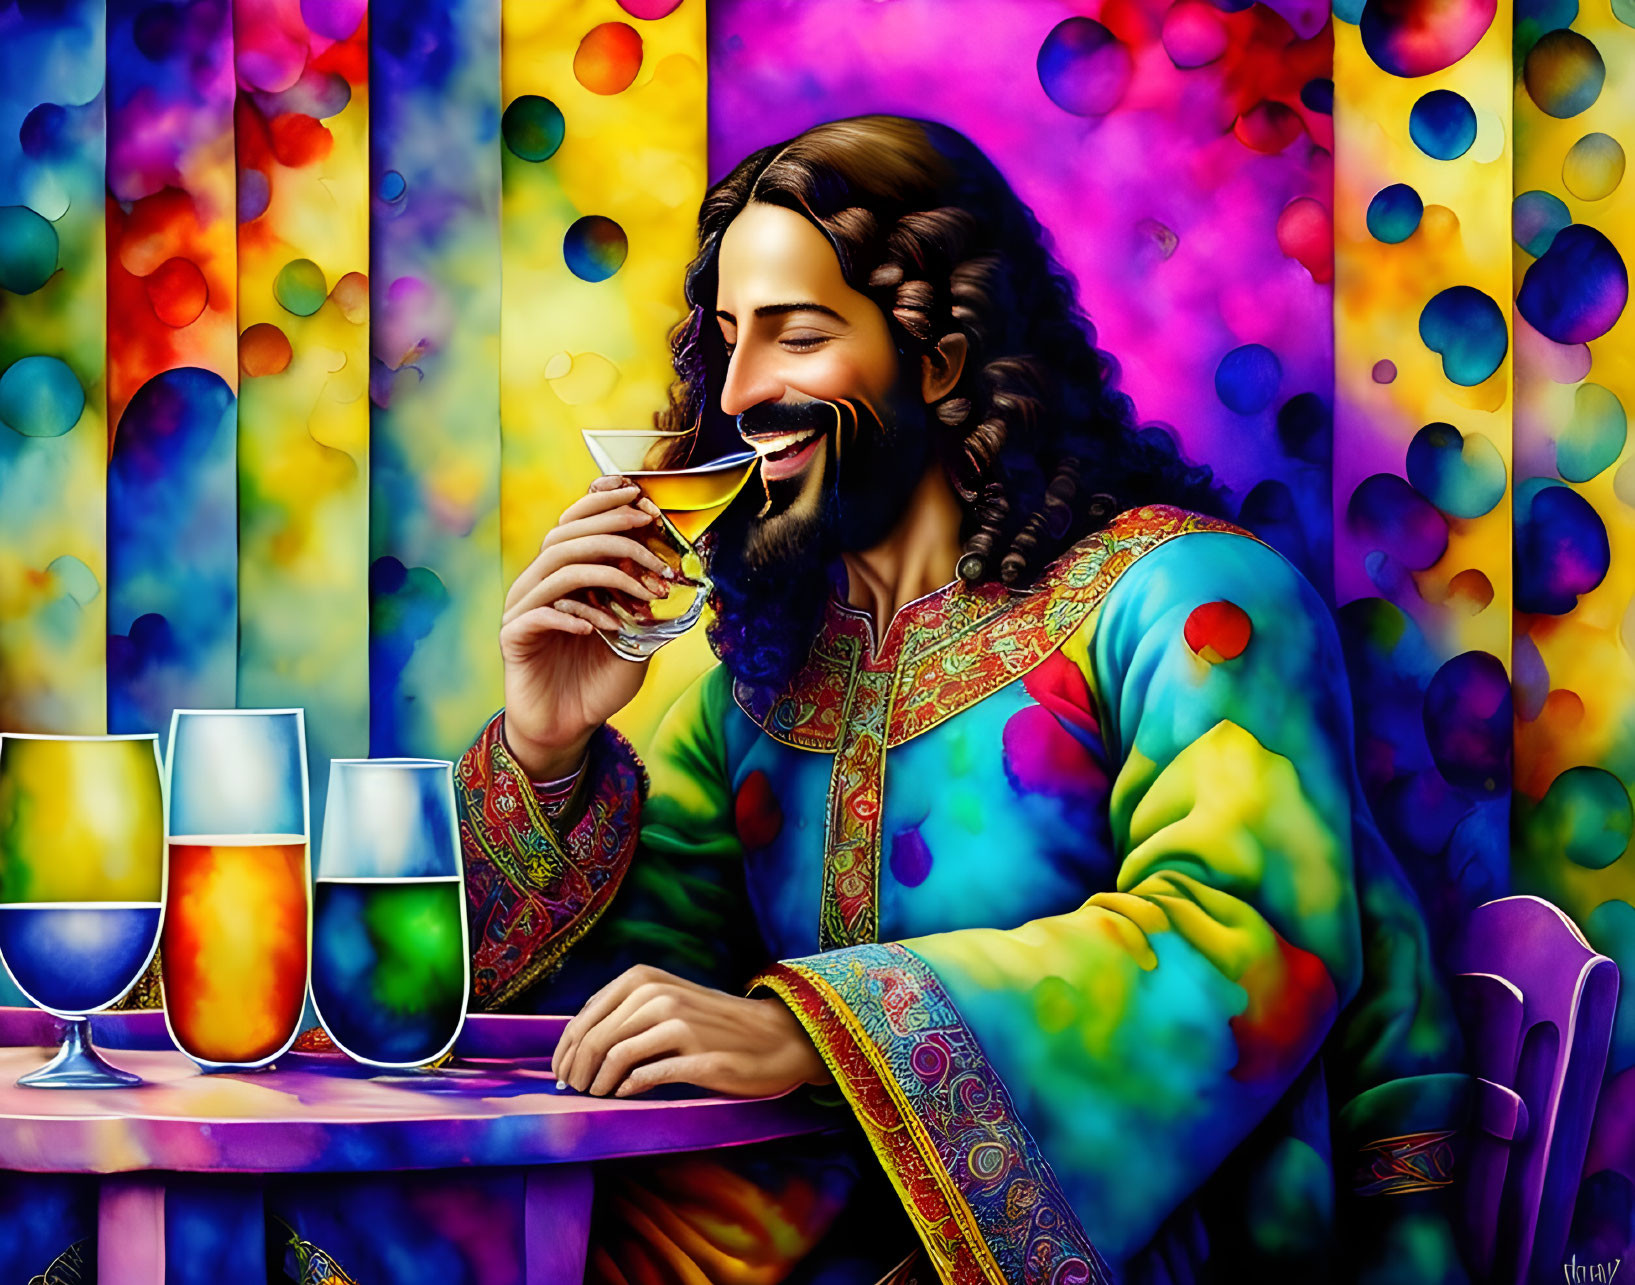 Bearded man smiling with golden chalice at colorful table